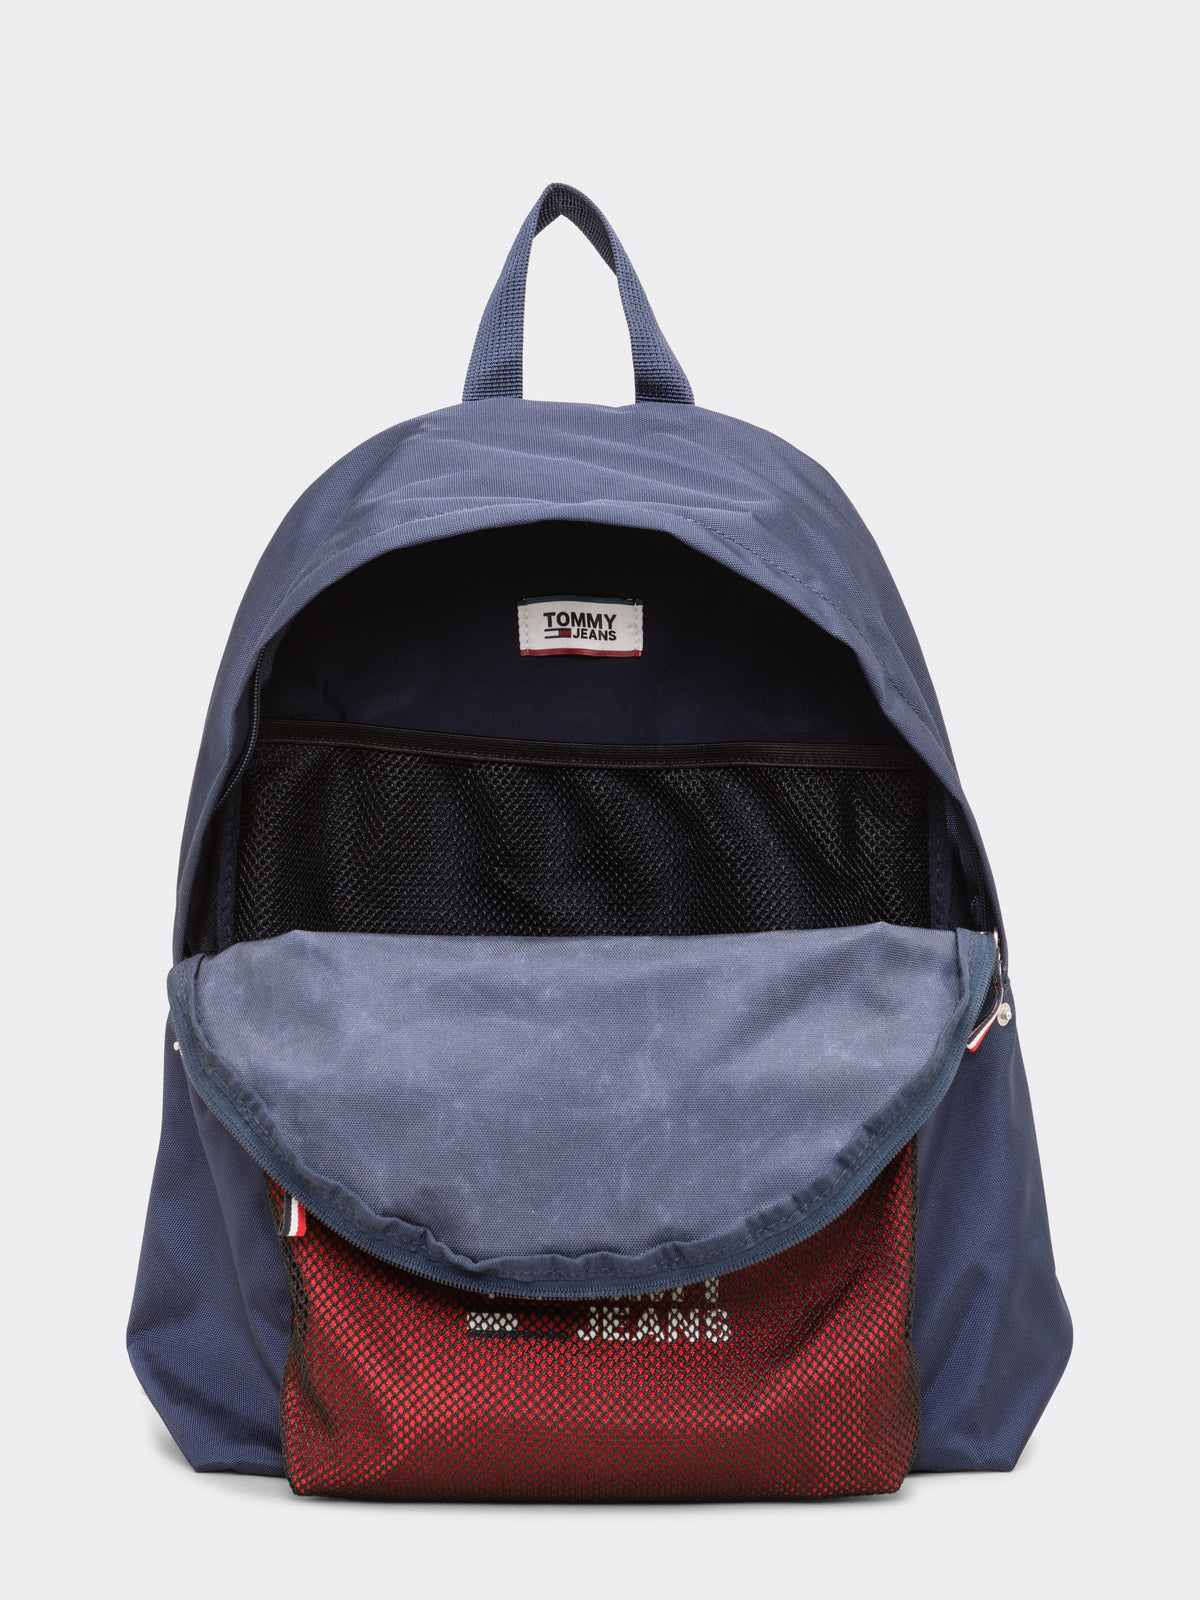 Cool City Backpack in Black Iris Blue &amp; Red